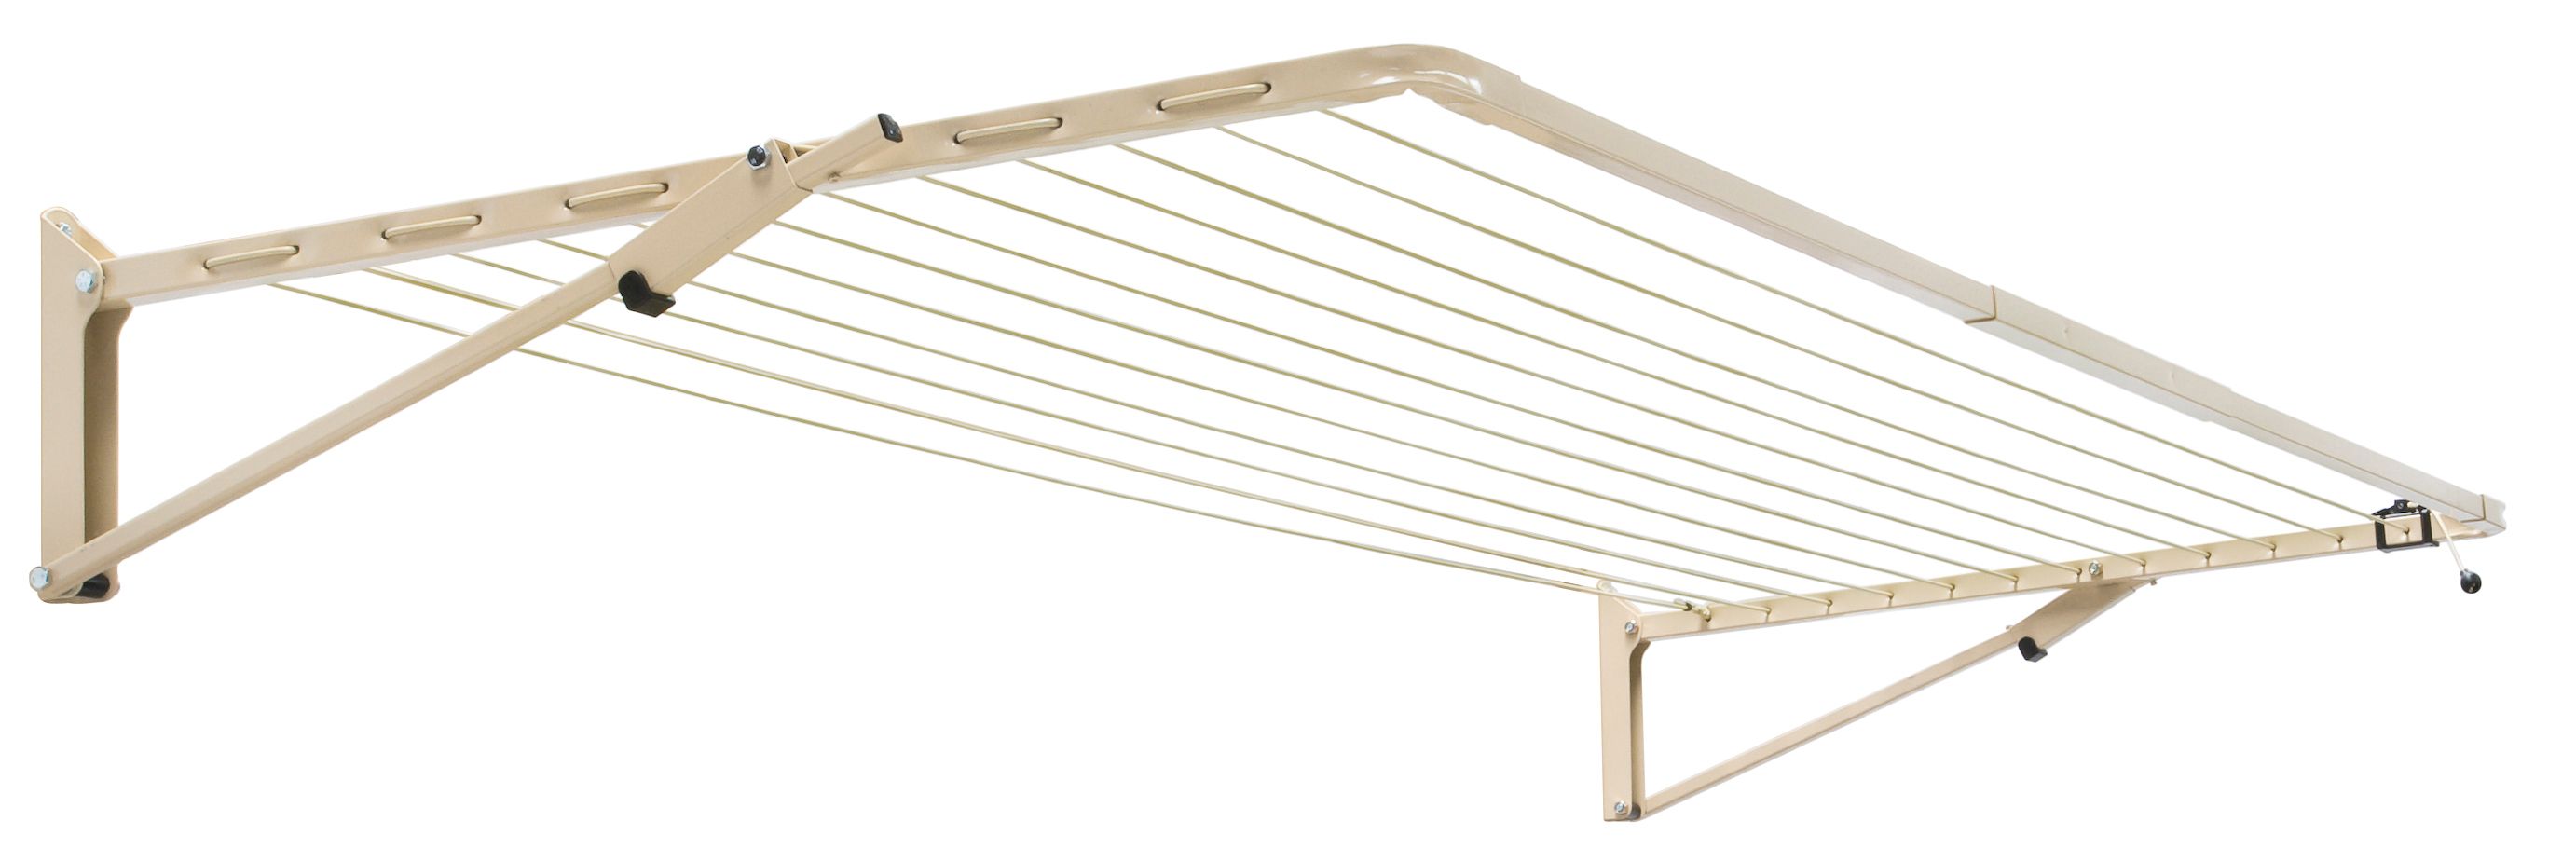 Compact Folding Frame Clotheslines